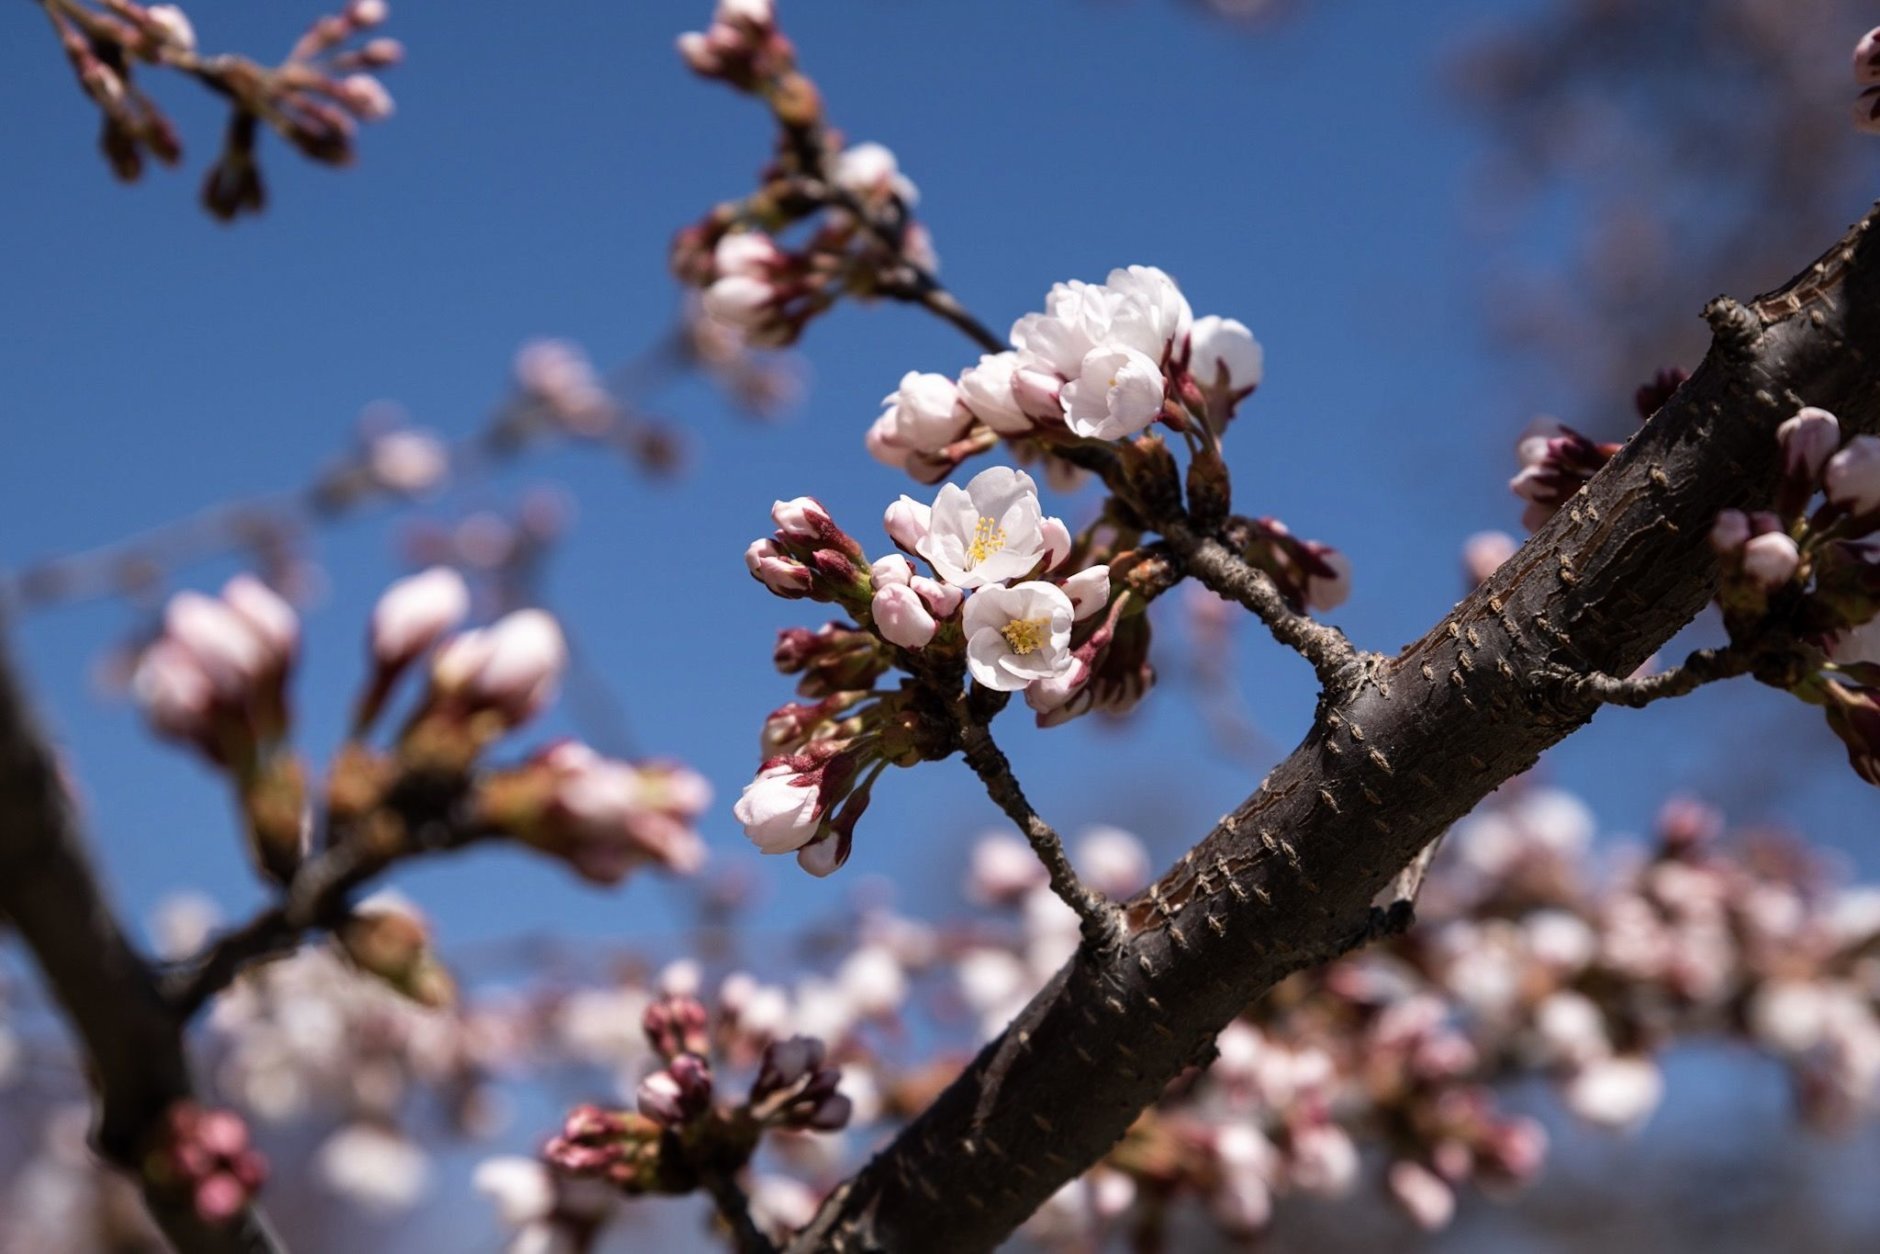 On March 28, three days before the forecast full bloom on April 1, all trees were fully loaded with reddish-pink buds — and a few early blooms, like these. (WTOP/Alejandro Alvarez)